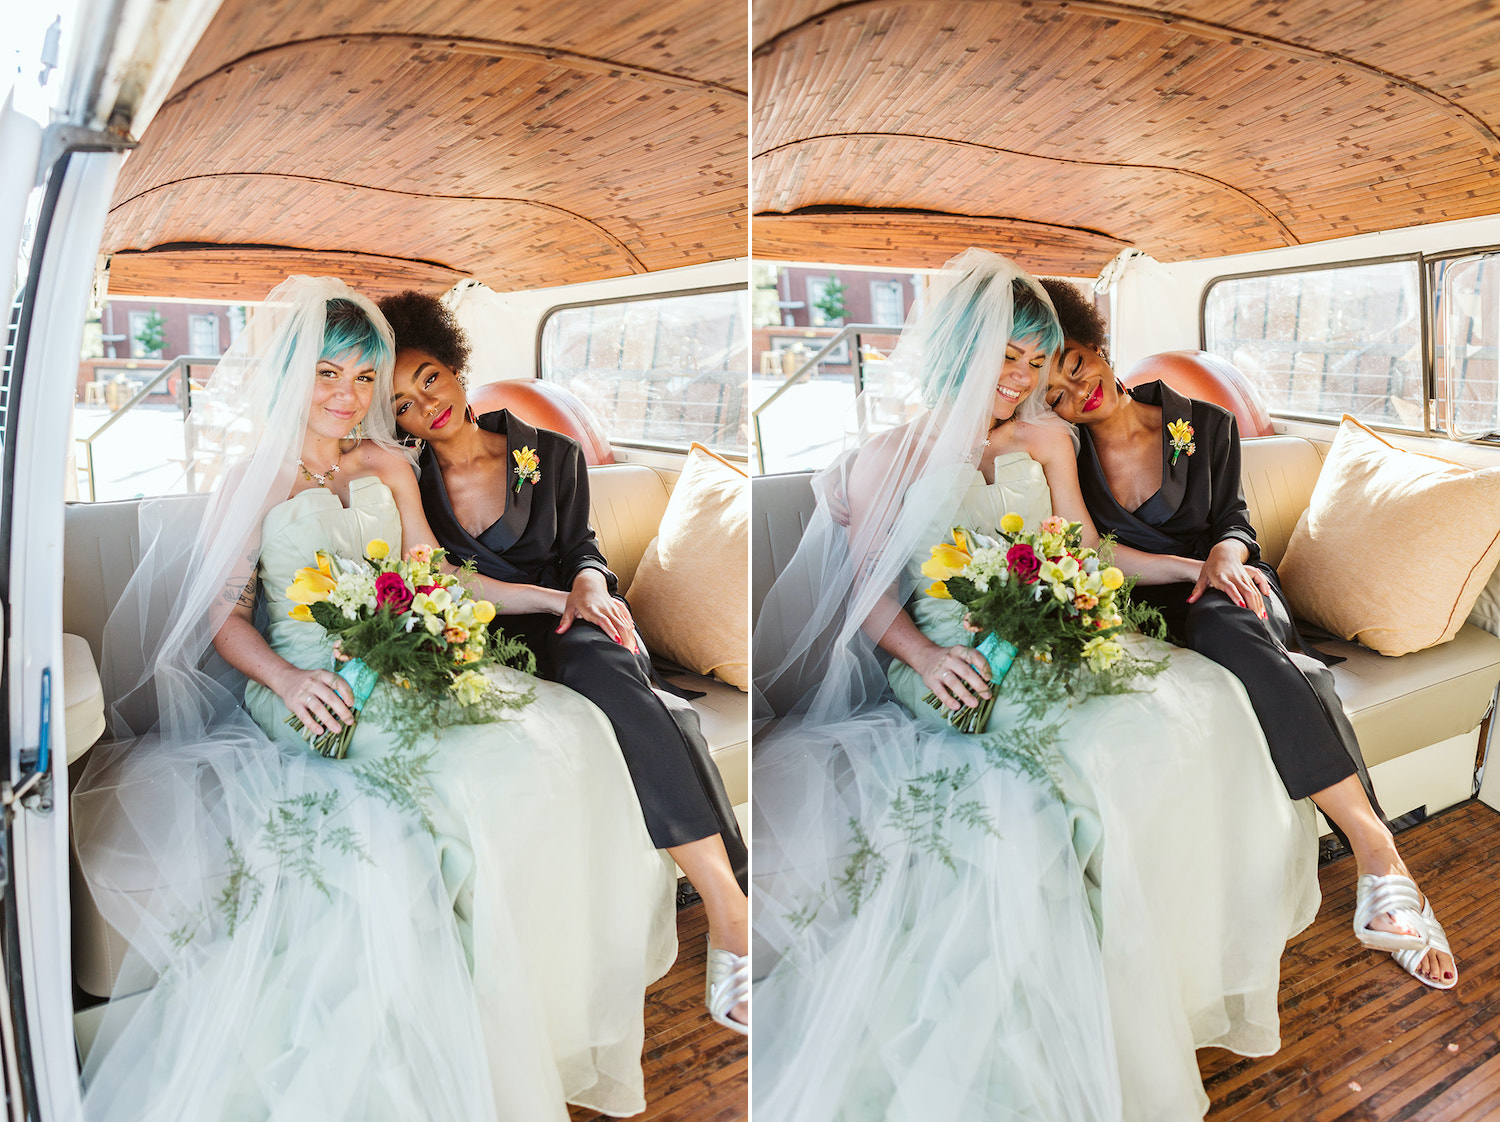 lesbian brides at LGBTQ wedding in Chattanooga styled shoot cuddle in back of vintage yellow Volkswagon bus at Moxy Hotel